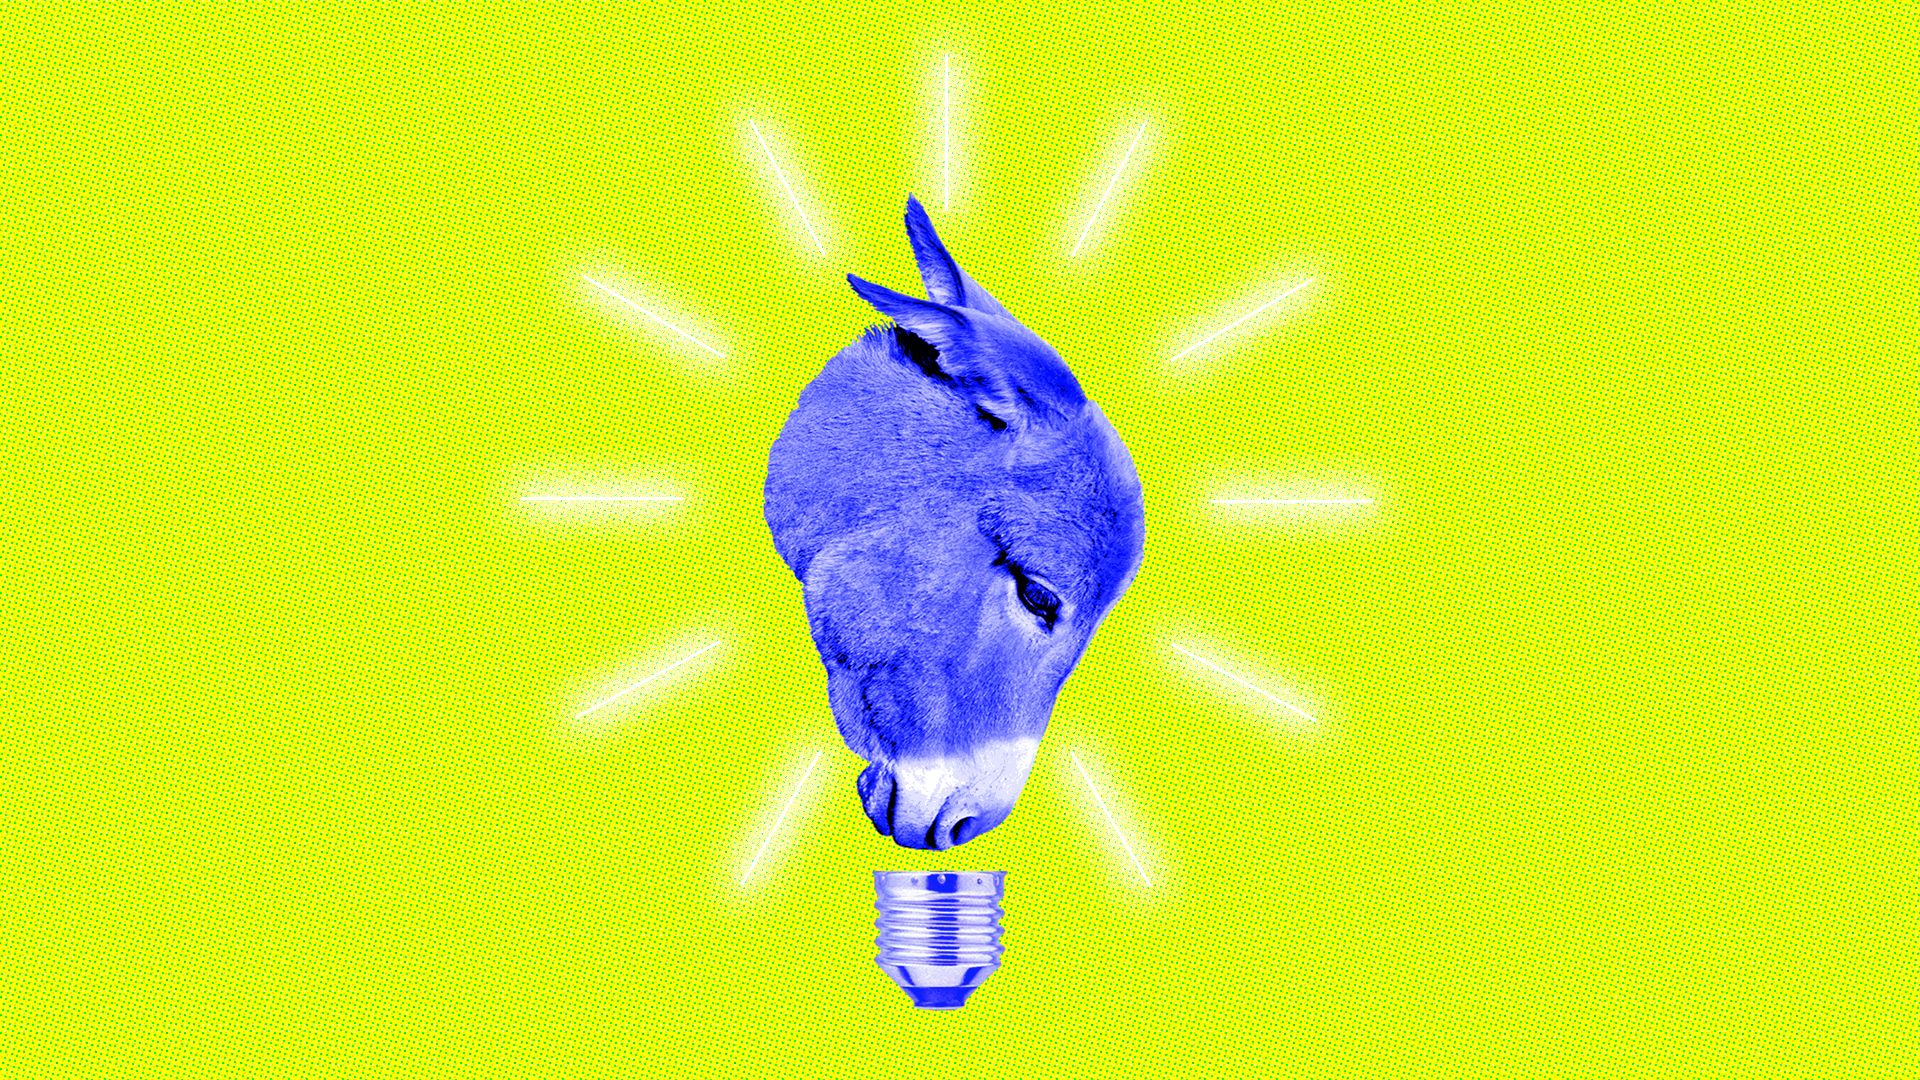 This is a donkey and a lightbulb, a symbol of the 2020 Democratic presidential election race